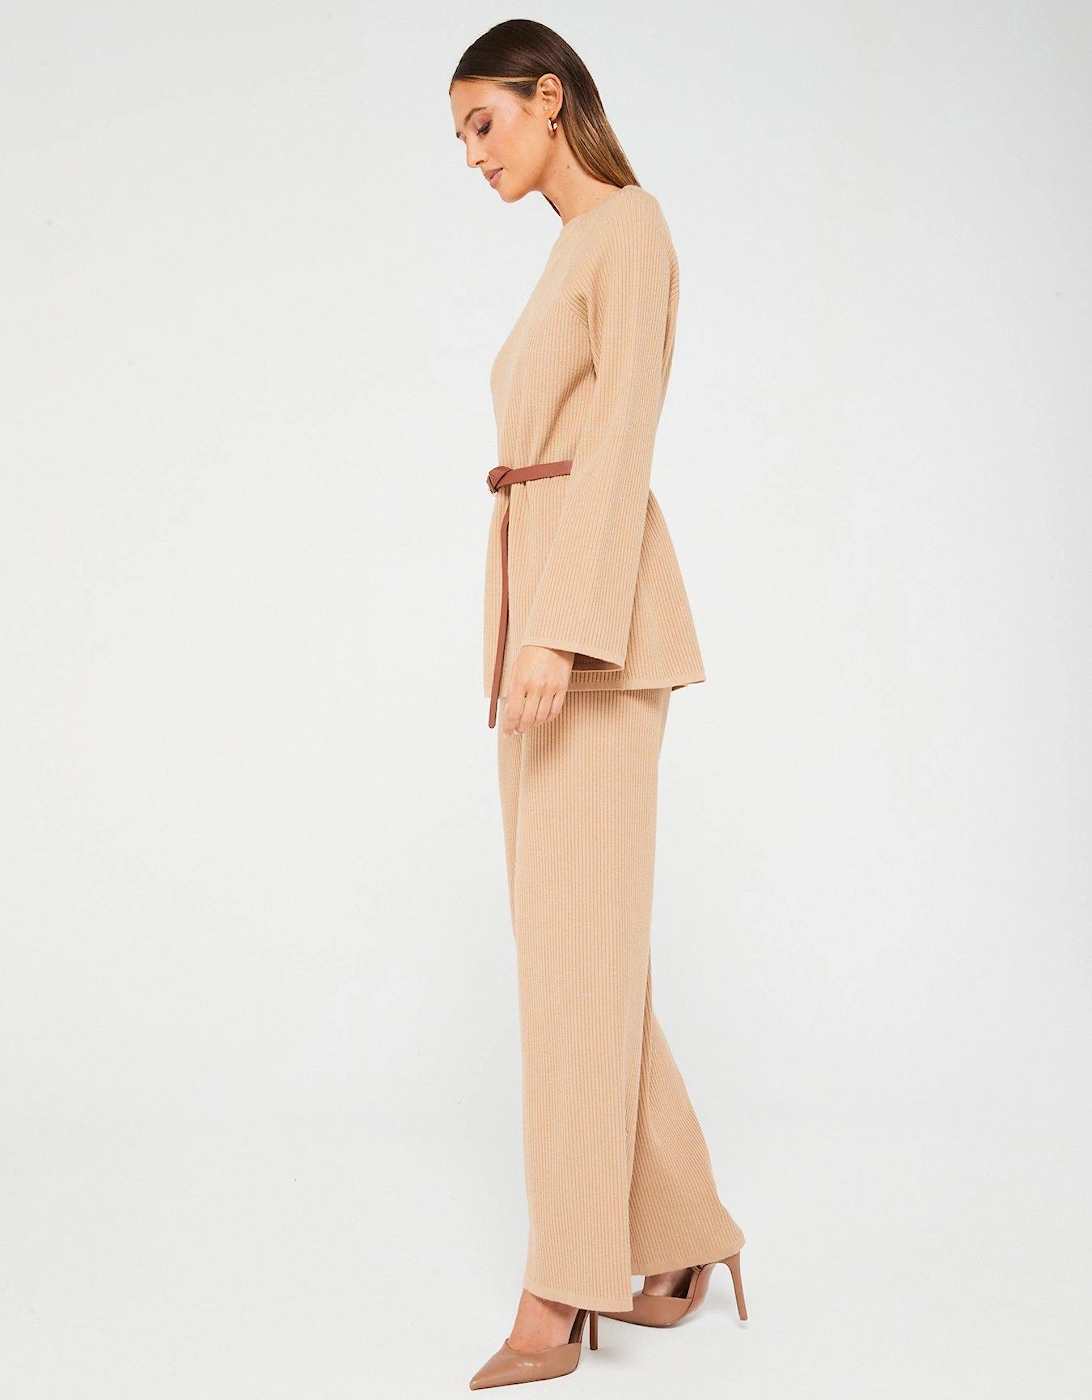 Long Sleeve Belted Knitted Rib Co-ord Top - Beige 